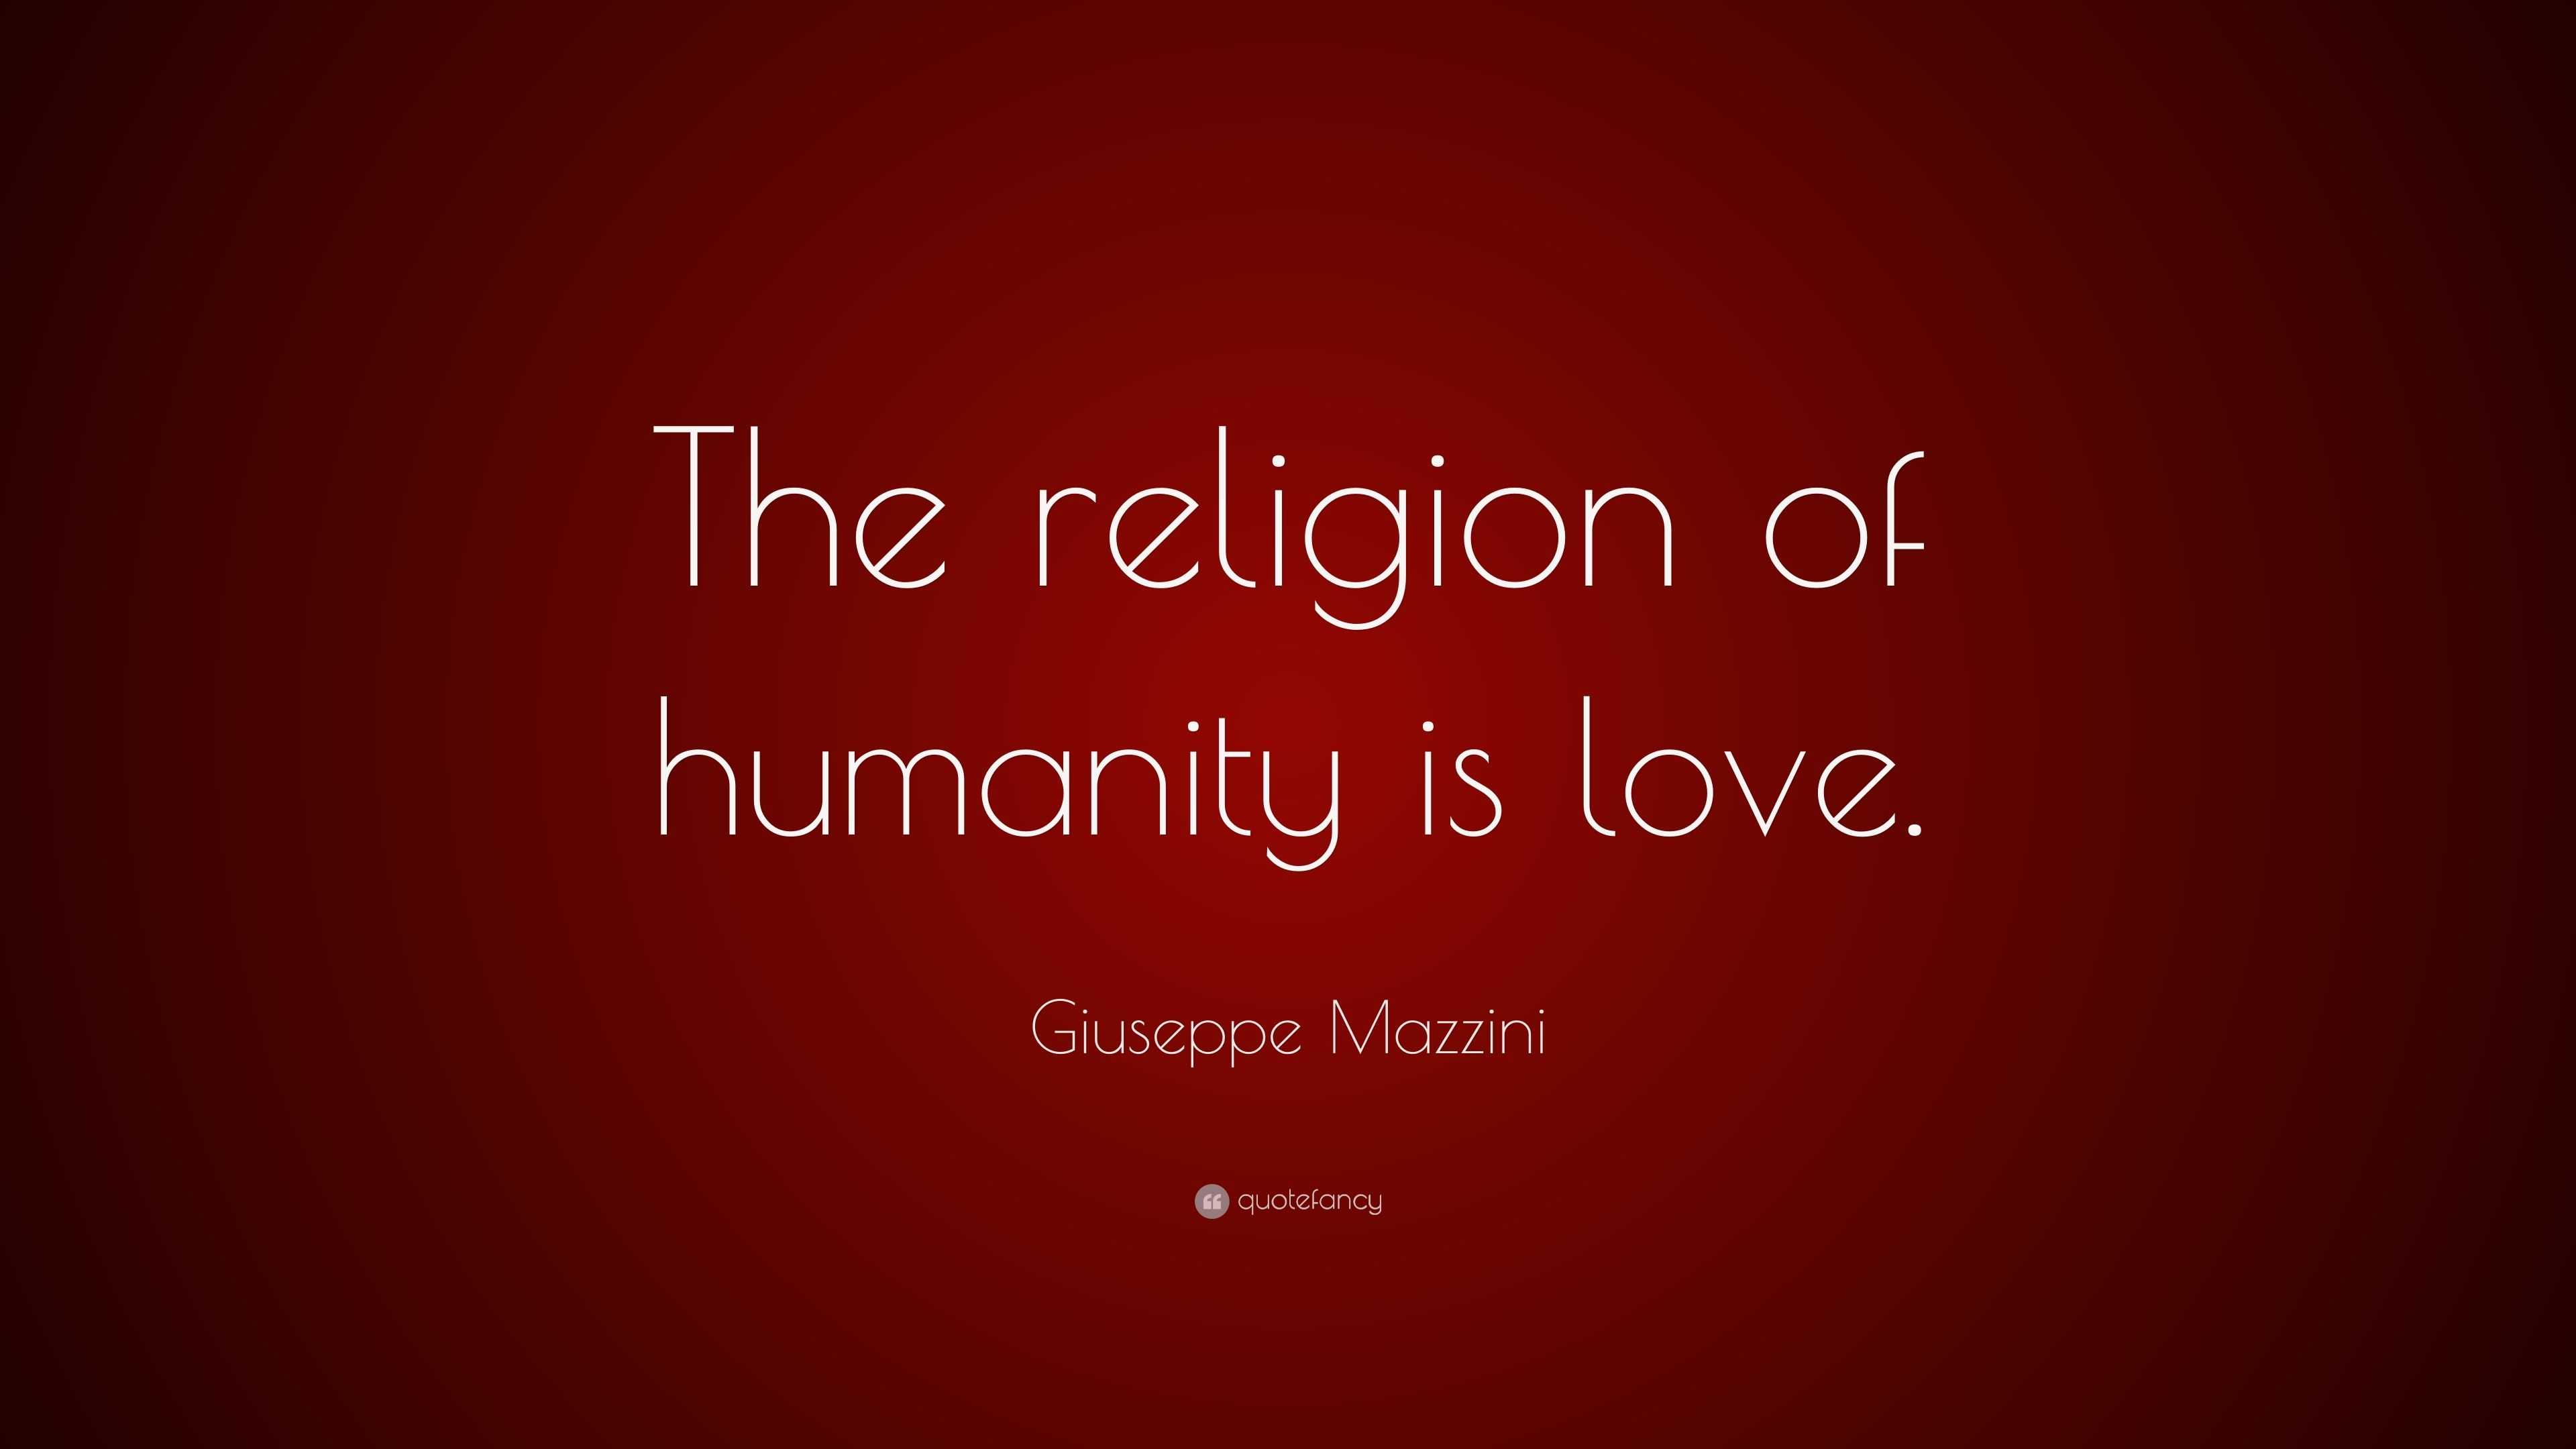 Giuseppe Mazzini Quote: "The religion of humanity is love." (7 wallpapers) - Quotefancy